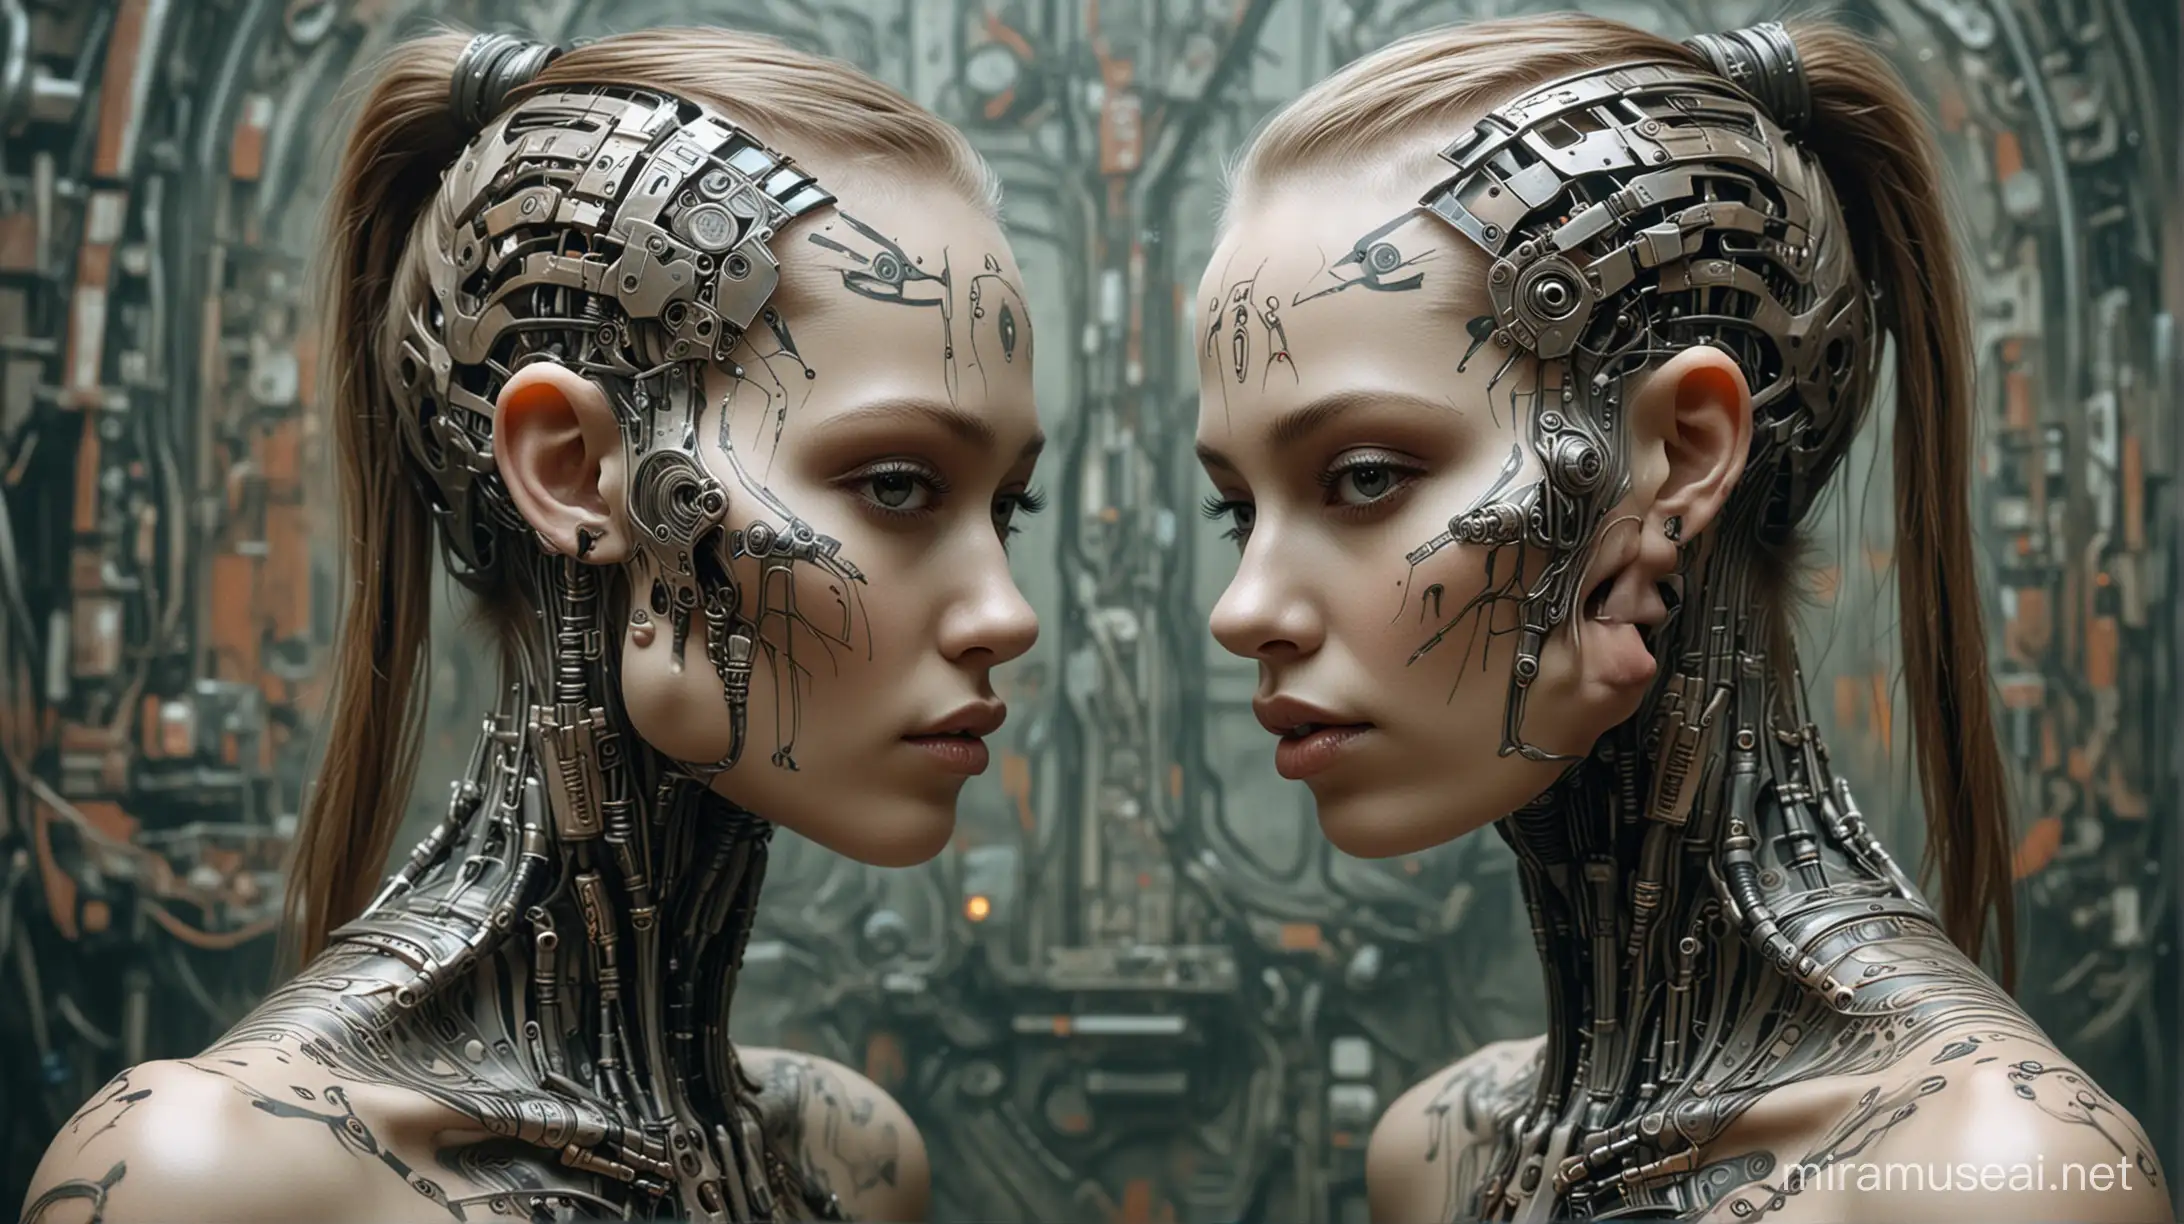 tattooed tribal cybernetic biomechanical two girls with painted faces, film, Photo-Alien, Futuristic Fashion. Style Peter Gric art